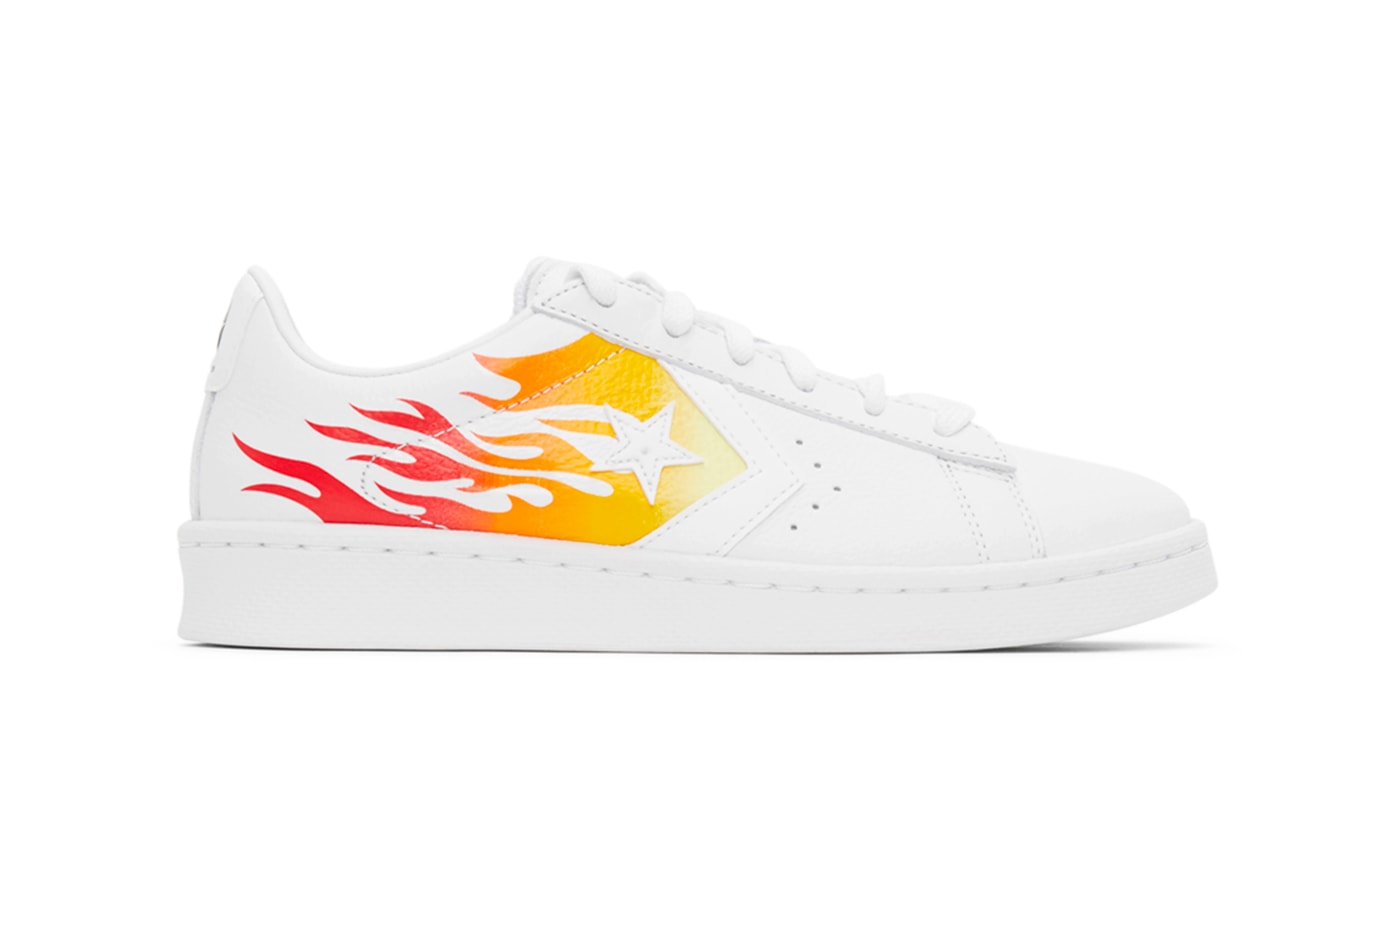 Converse Pro Leather OX White Flame menswear streetwear shoes sneakers leather red yellow bold motif print highlight trainers runners tennis perforation nike ssense flaming fiery fire all star